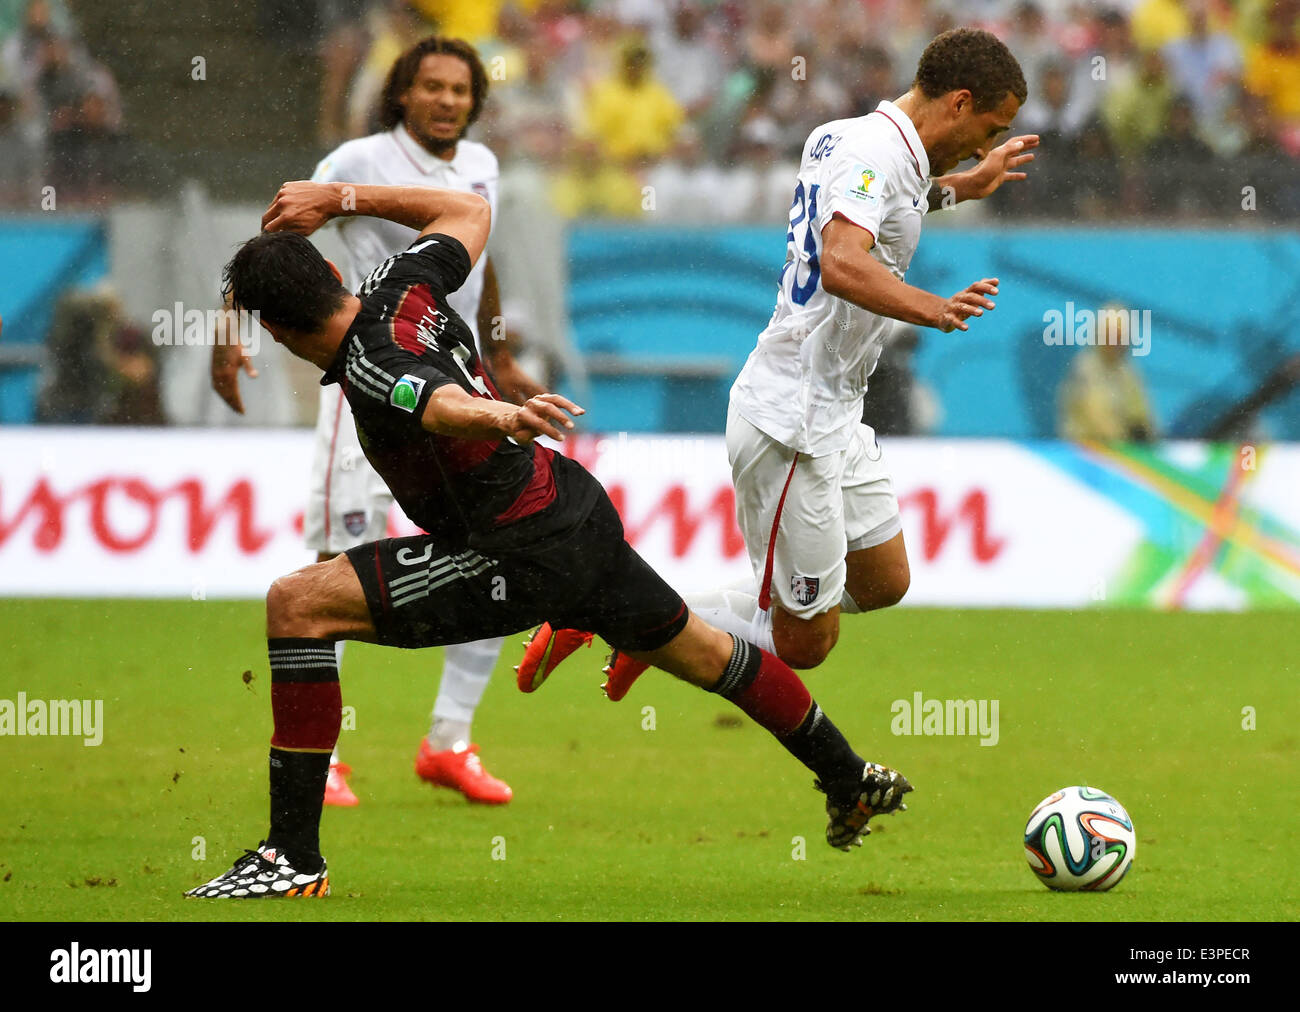 Recife, Brazil. 26th June, 2014. Germany's Mats Hummels (L, front) vies with Fabian Johnson of the U.S. (R, front) during a Group G match between the U.S. and Germany of 2014 FIFA World Cup at the Arena Pernambuco Stadium in Recife, Brazil, on June 26, 2014. Credit:  Guo Yong/Xinhua/Alamy Live News Stock Photo